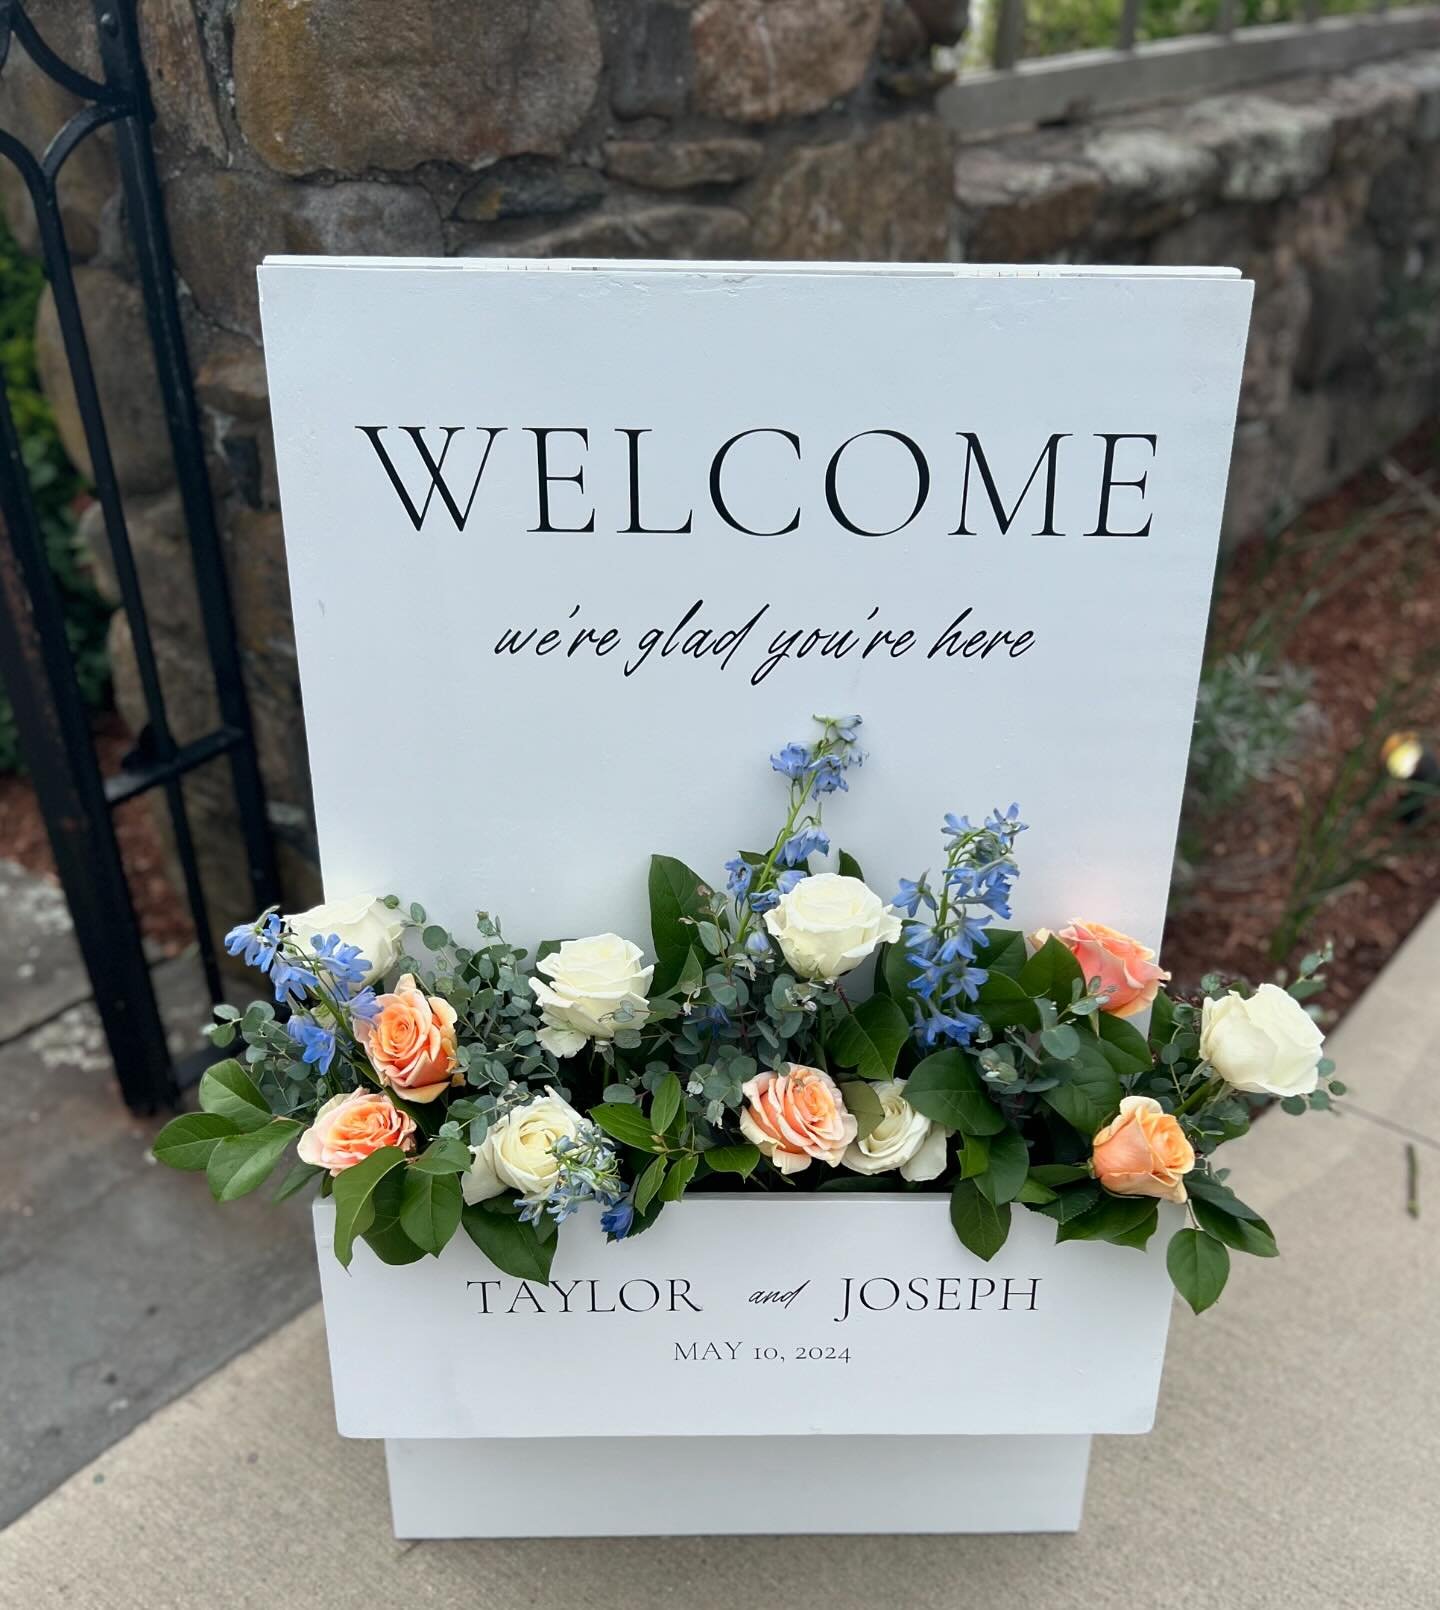 I love this new style welcome sign! So clever!